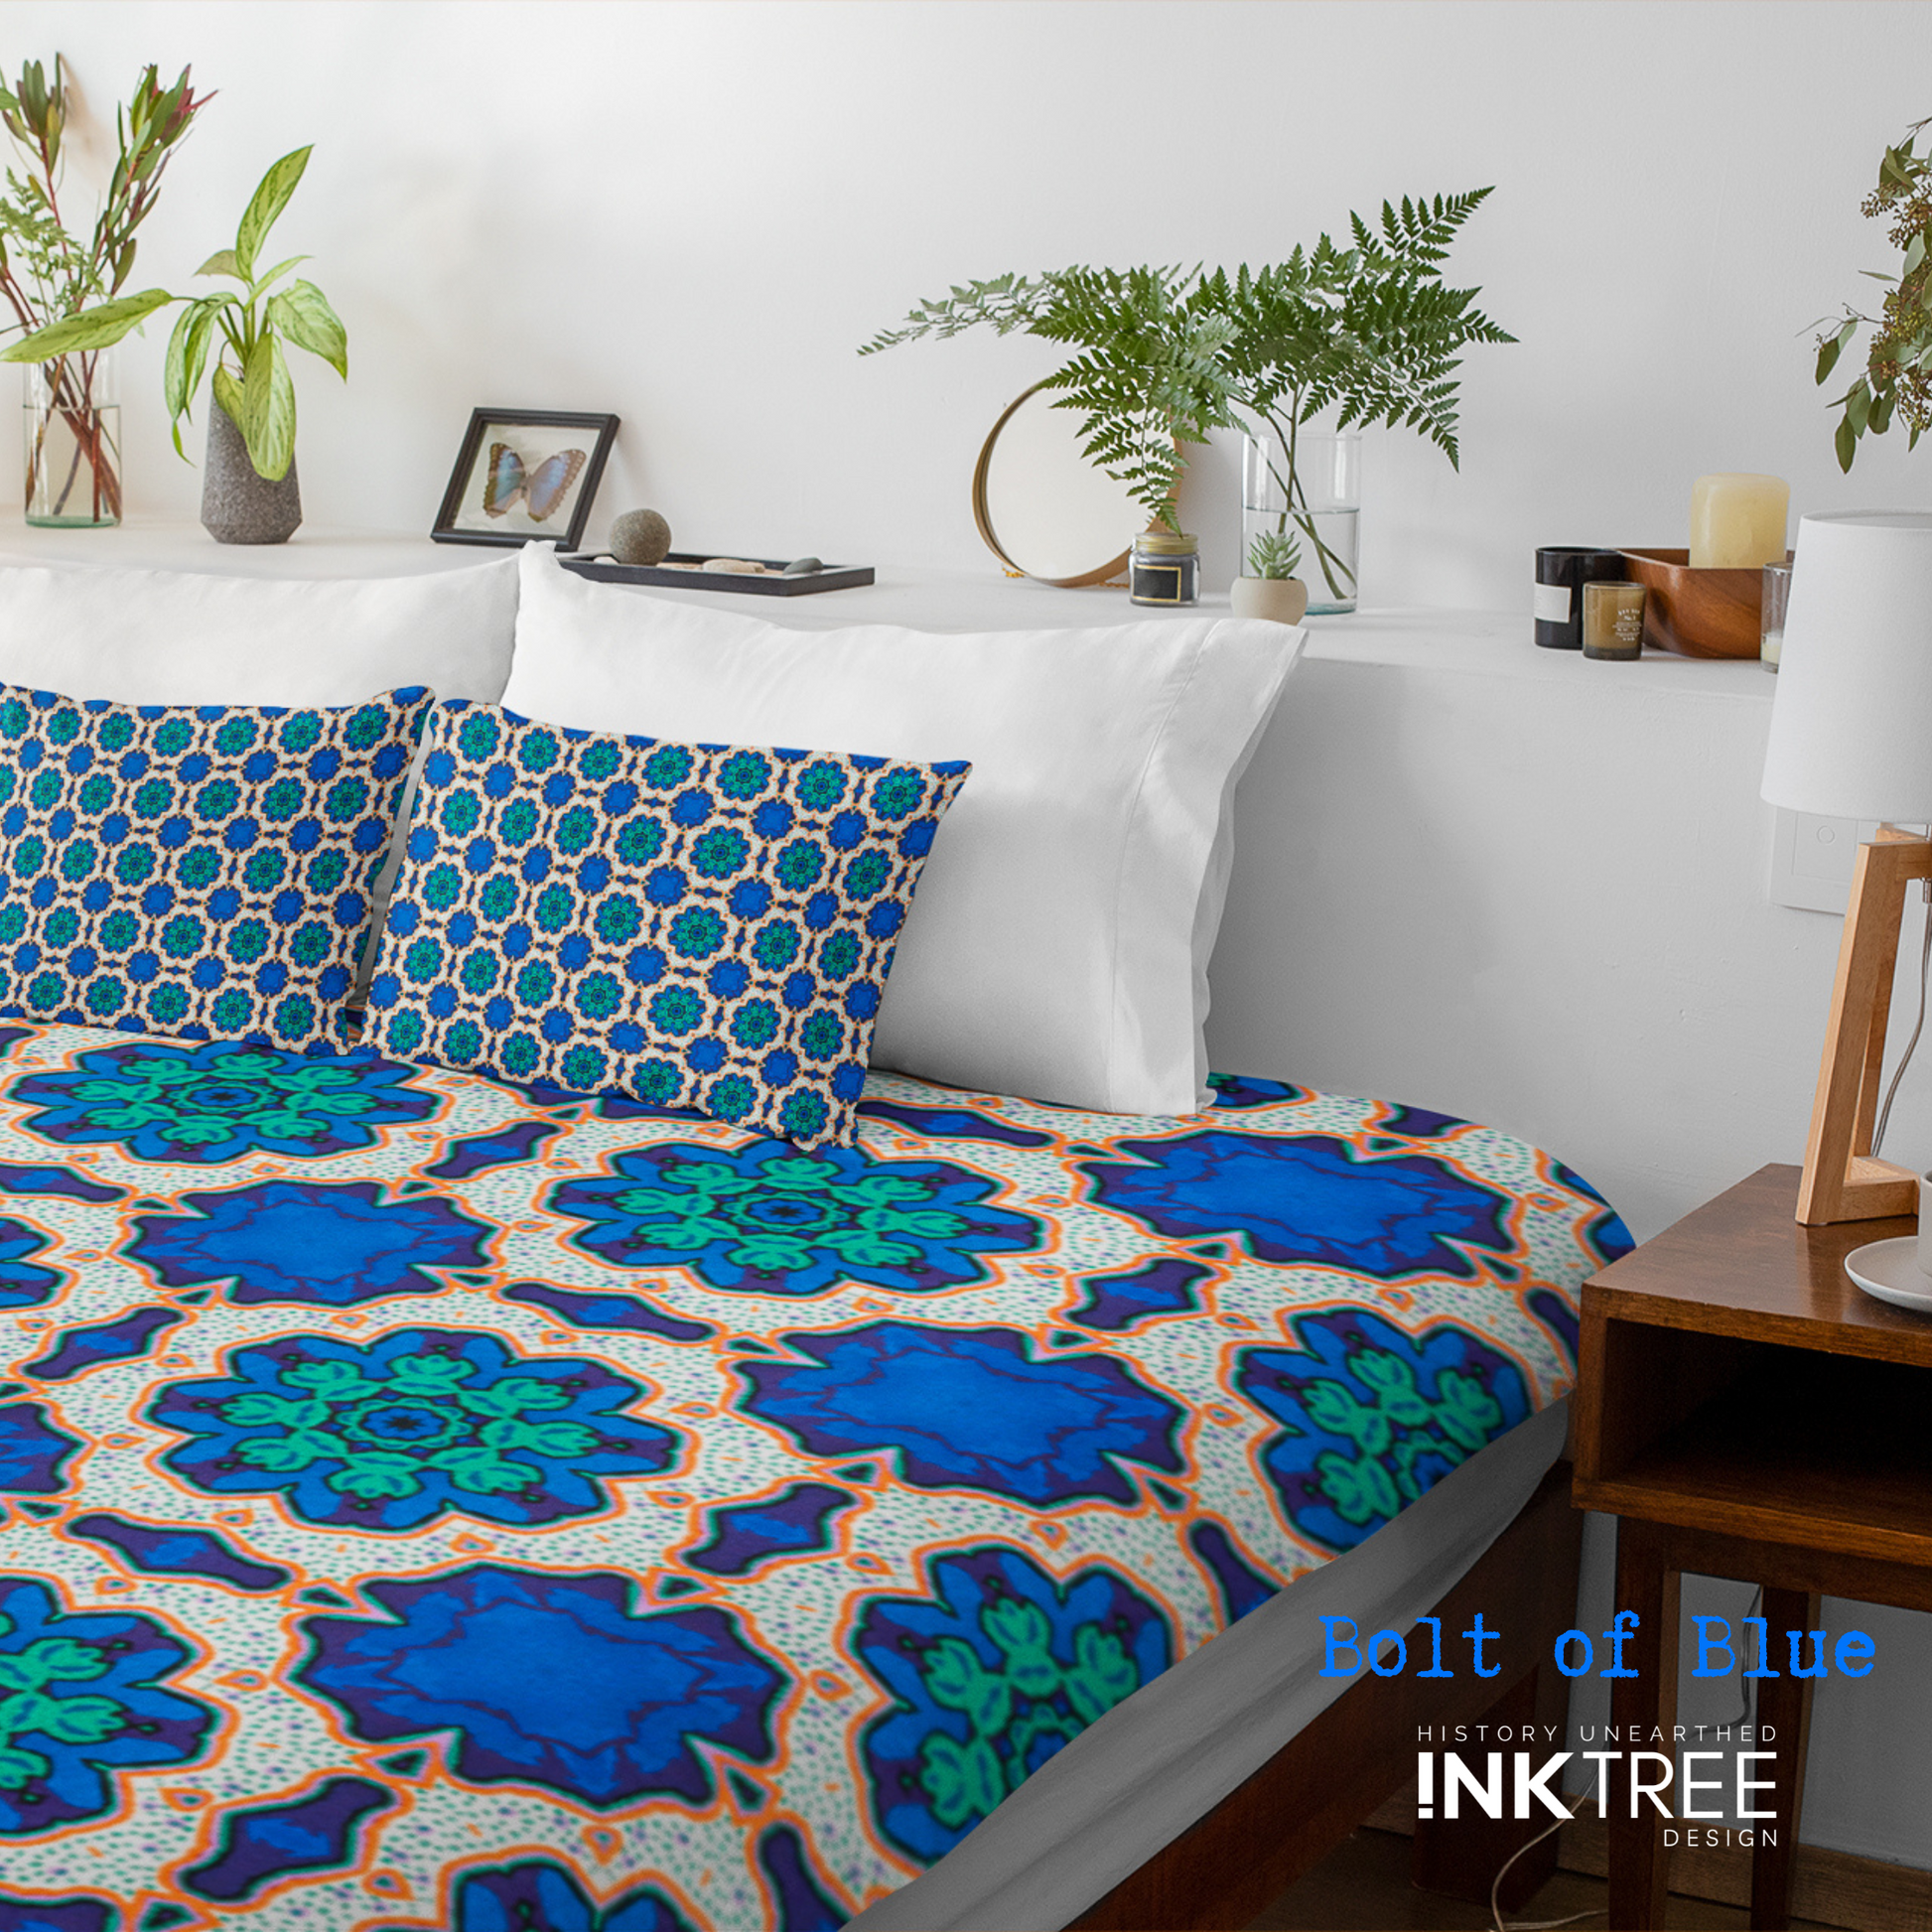 A doona cover and front pillows with an orange, white, black, blue and green floral pattern on a bed with a white wall, white pillows and white backboard background. There is a lamp with a white shade and wood base and plants and a small round metal mirror on the back board. There is also a bolt of blue, history unearthed ink tree design logo in the bottom right hand corner on it.